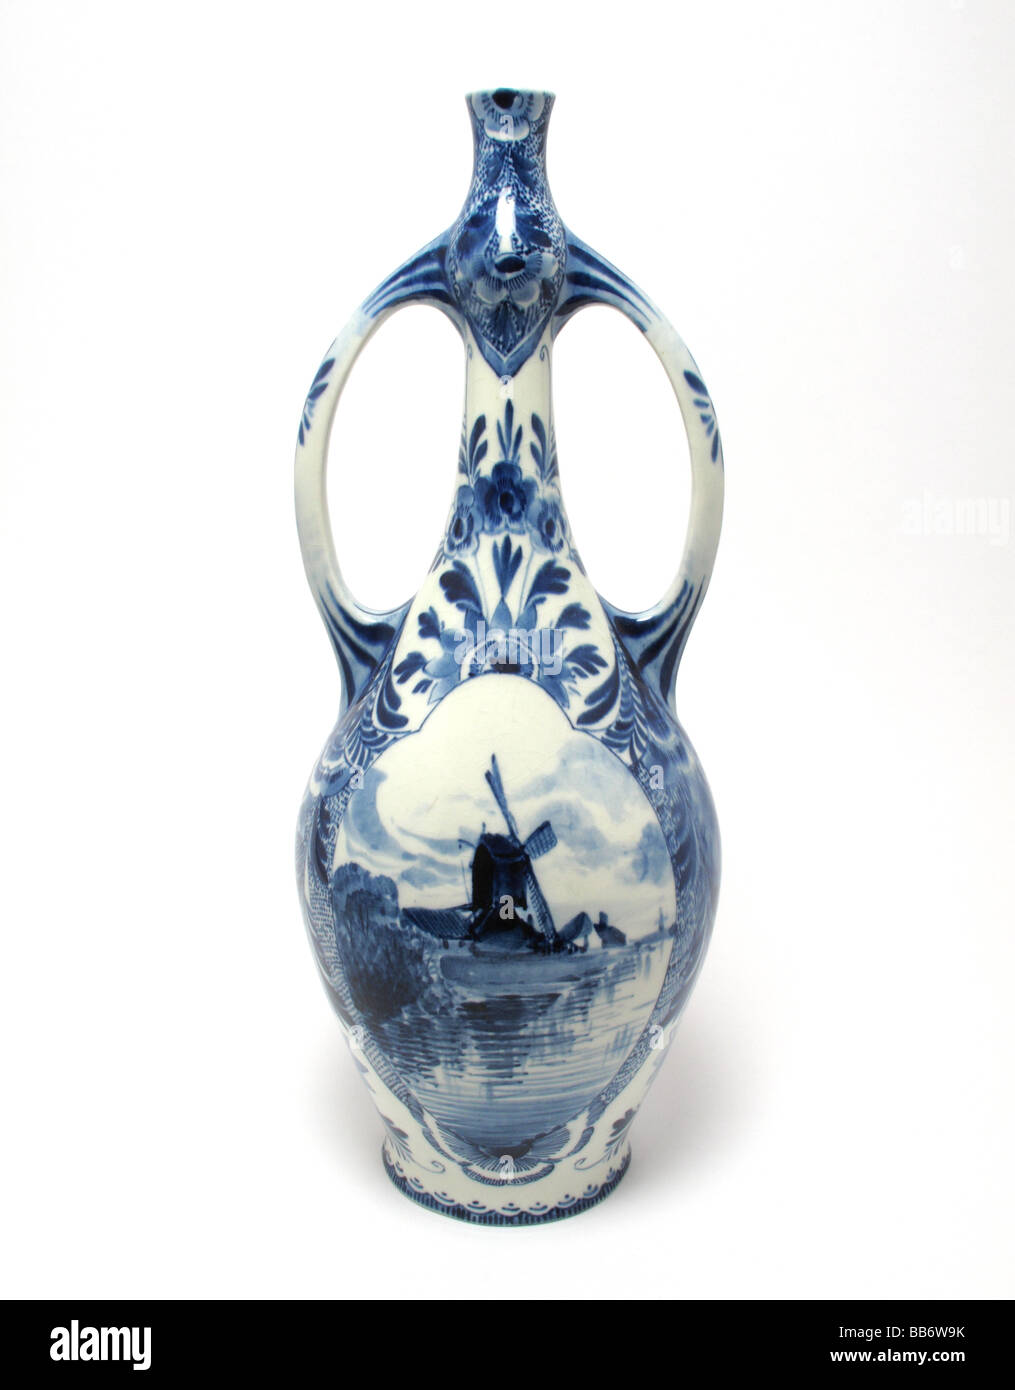 Antique Dutch Delft vase in Art Nouveau shape  with hand painted scenes of mindmills and canels made by Zuid. Stock Photo